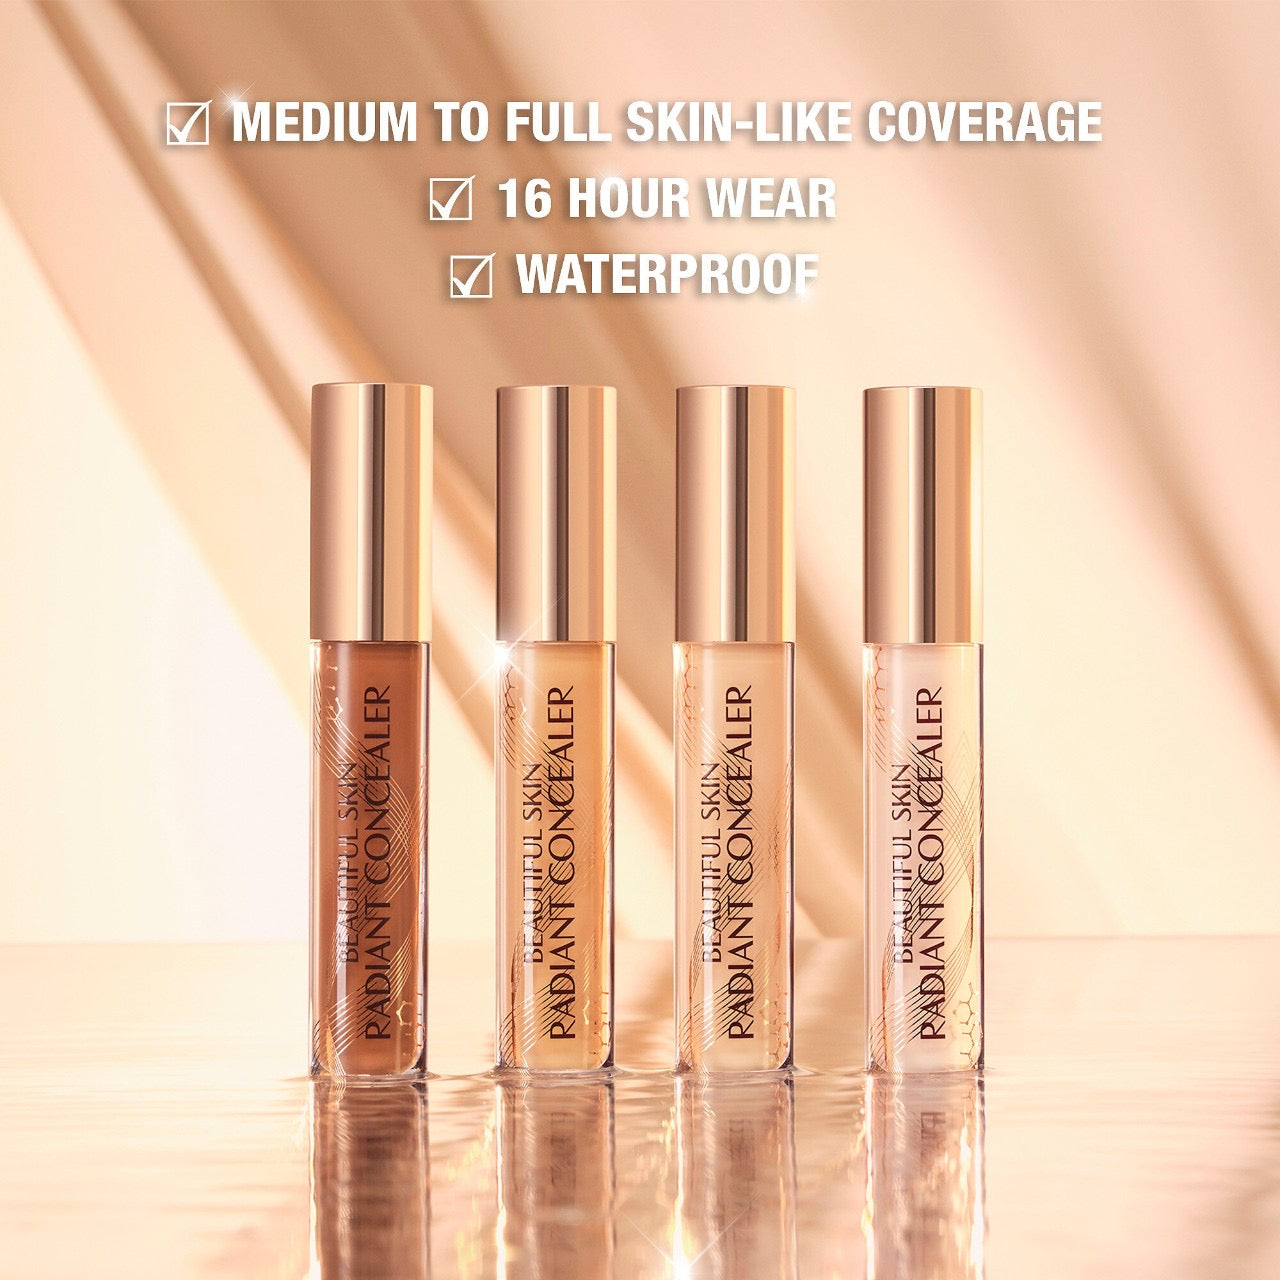 Charlotte Tilbury Beautiful Skin Medium to Full Coverage Radiant Concealer with Hyaluronic Acid